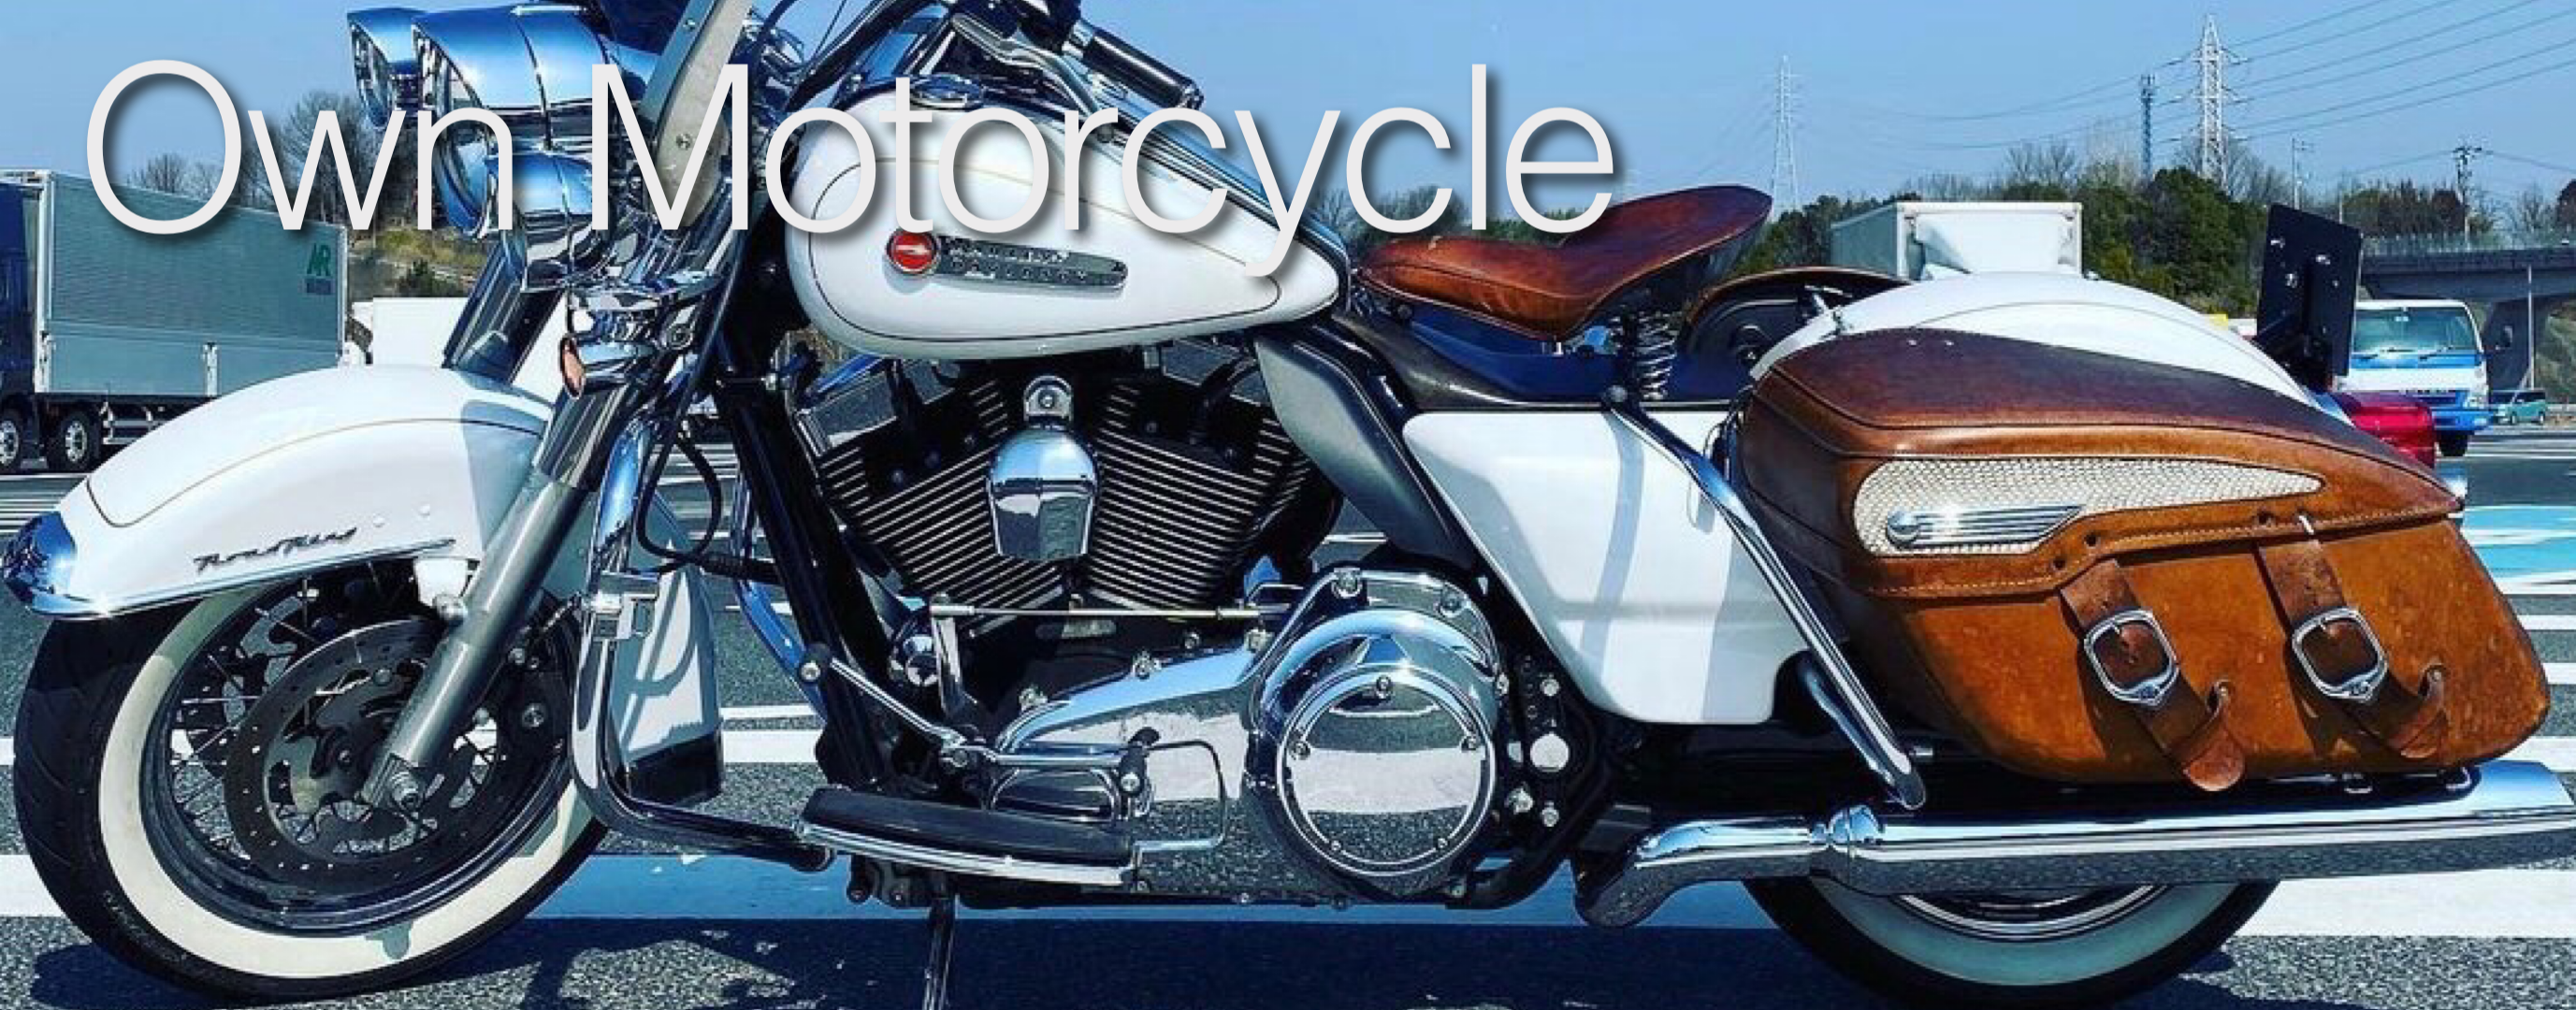 Own Mortorcycle